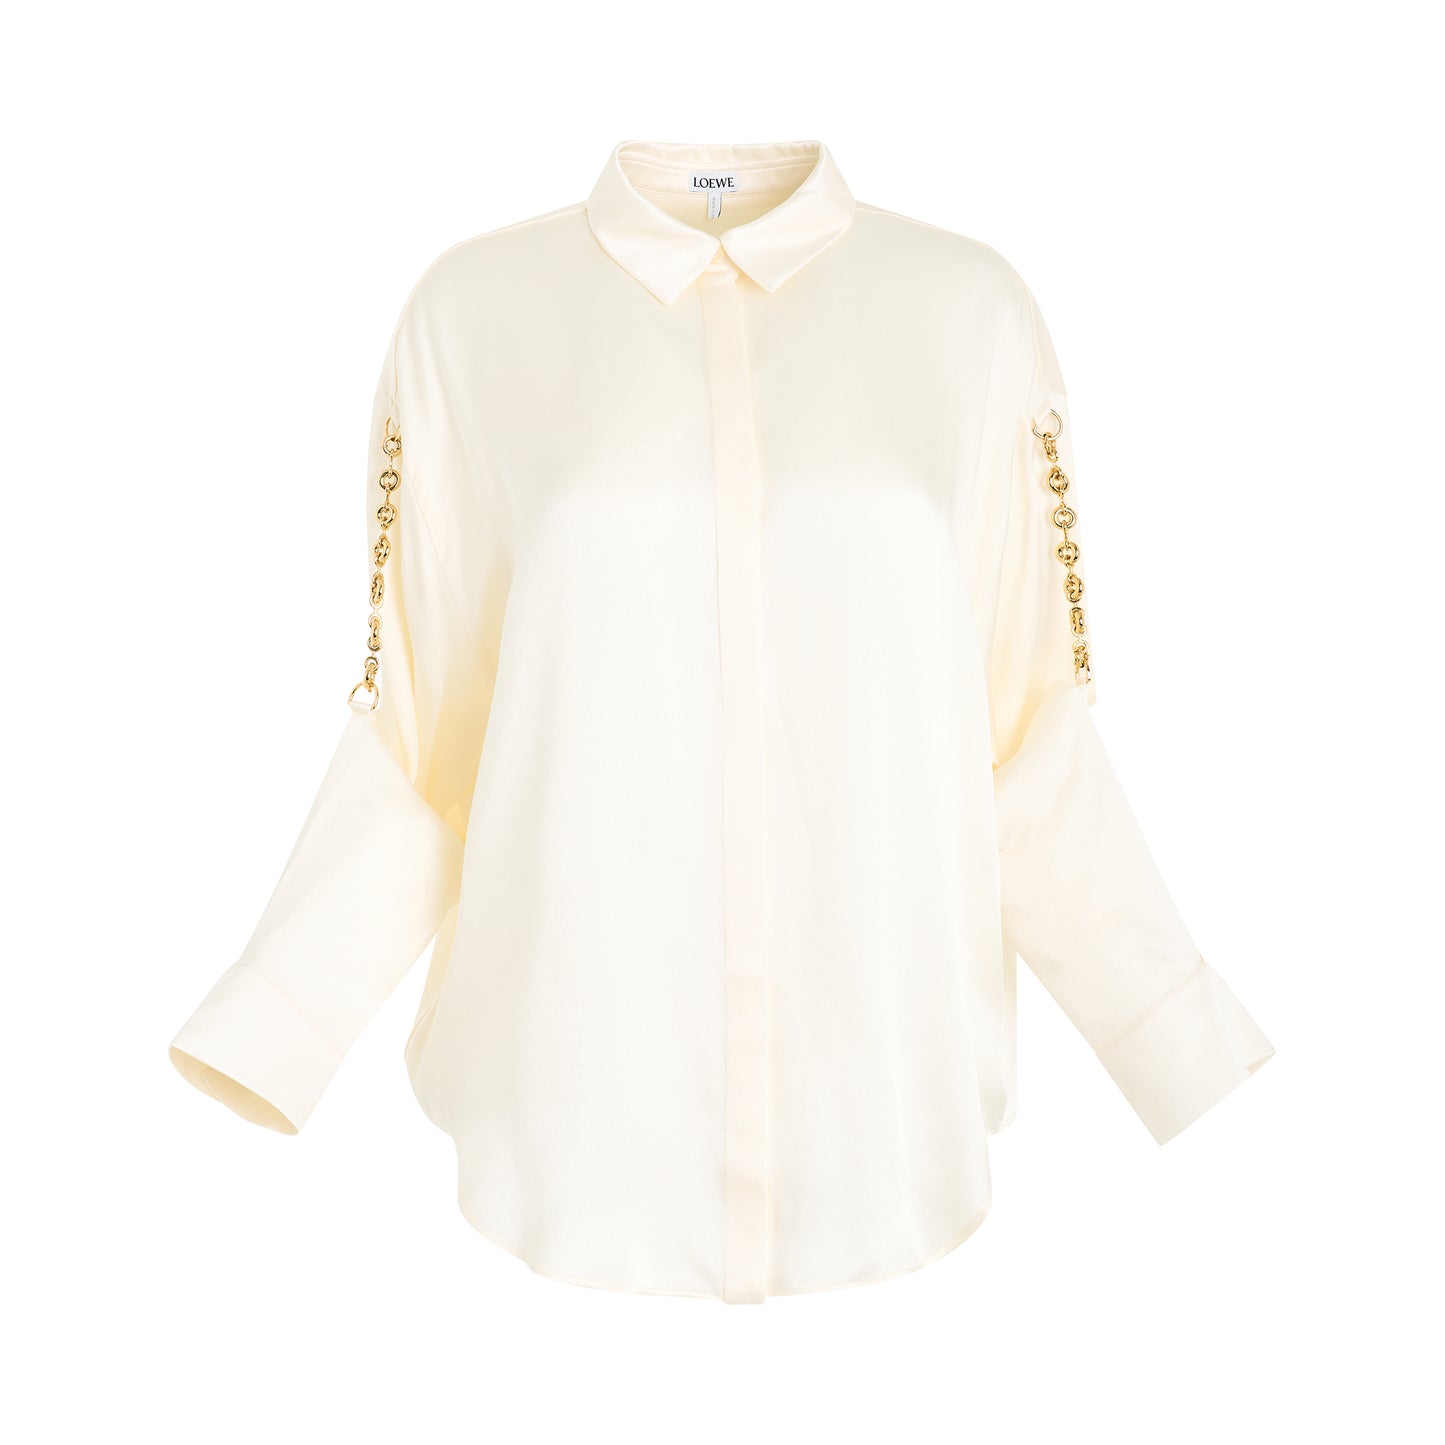 Chain Shirt in Ivory